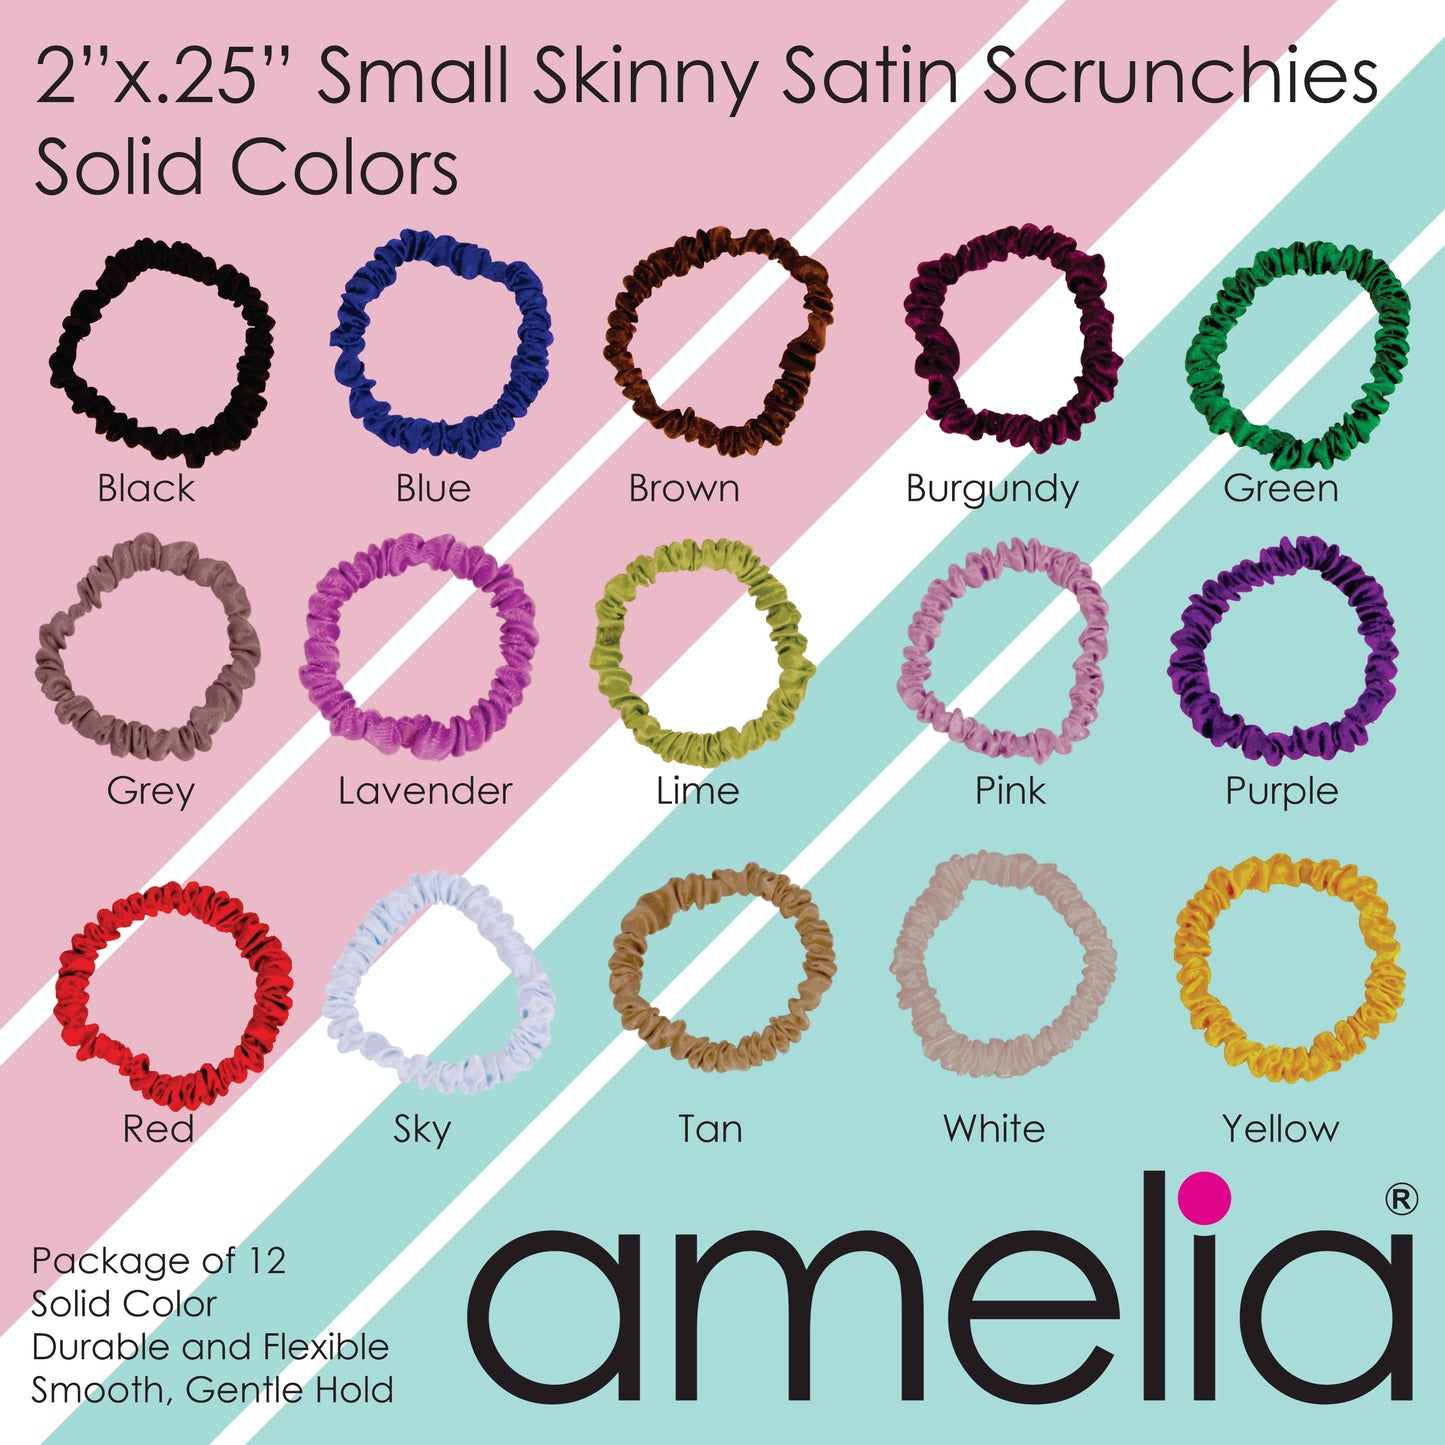 Amelia Beauty, Lime Skinny Satin Scrunchies, 2in Diameter, Gentle and Strong Hold, No Snag, No Dents or Creases. 12 Pack